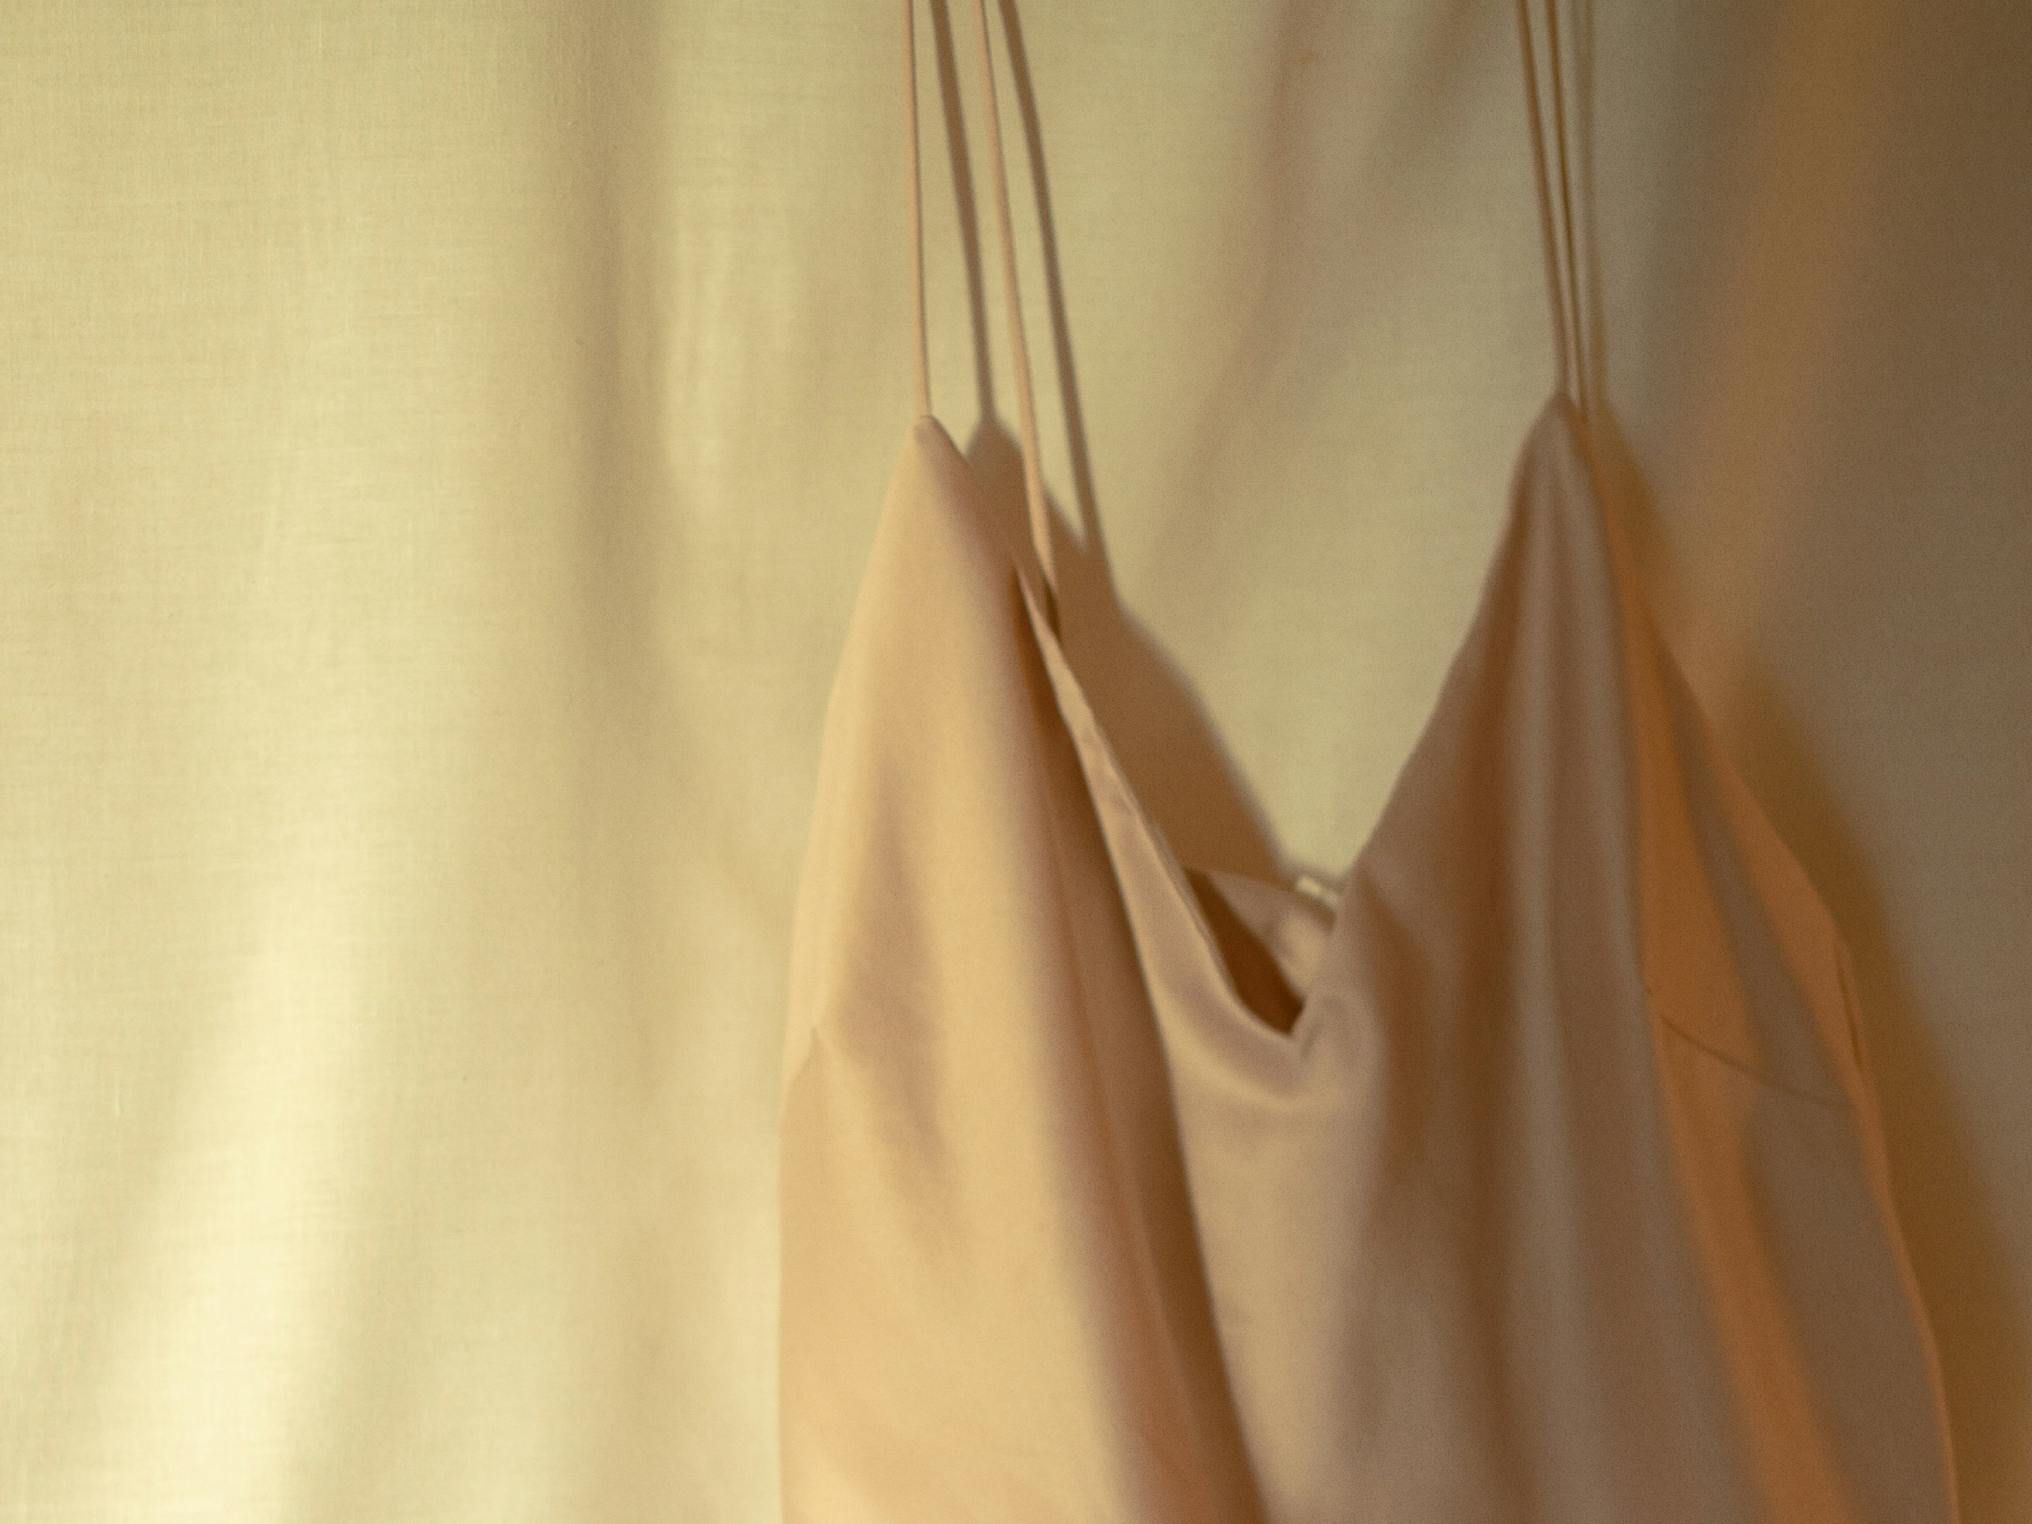 Cream colored satin nightgown draped against a white wall, a stem of small yellow flowers with green leaves in front.